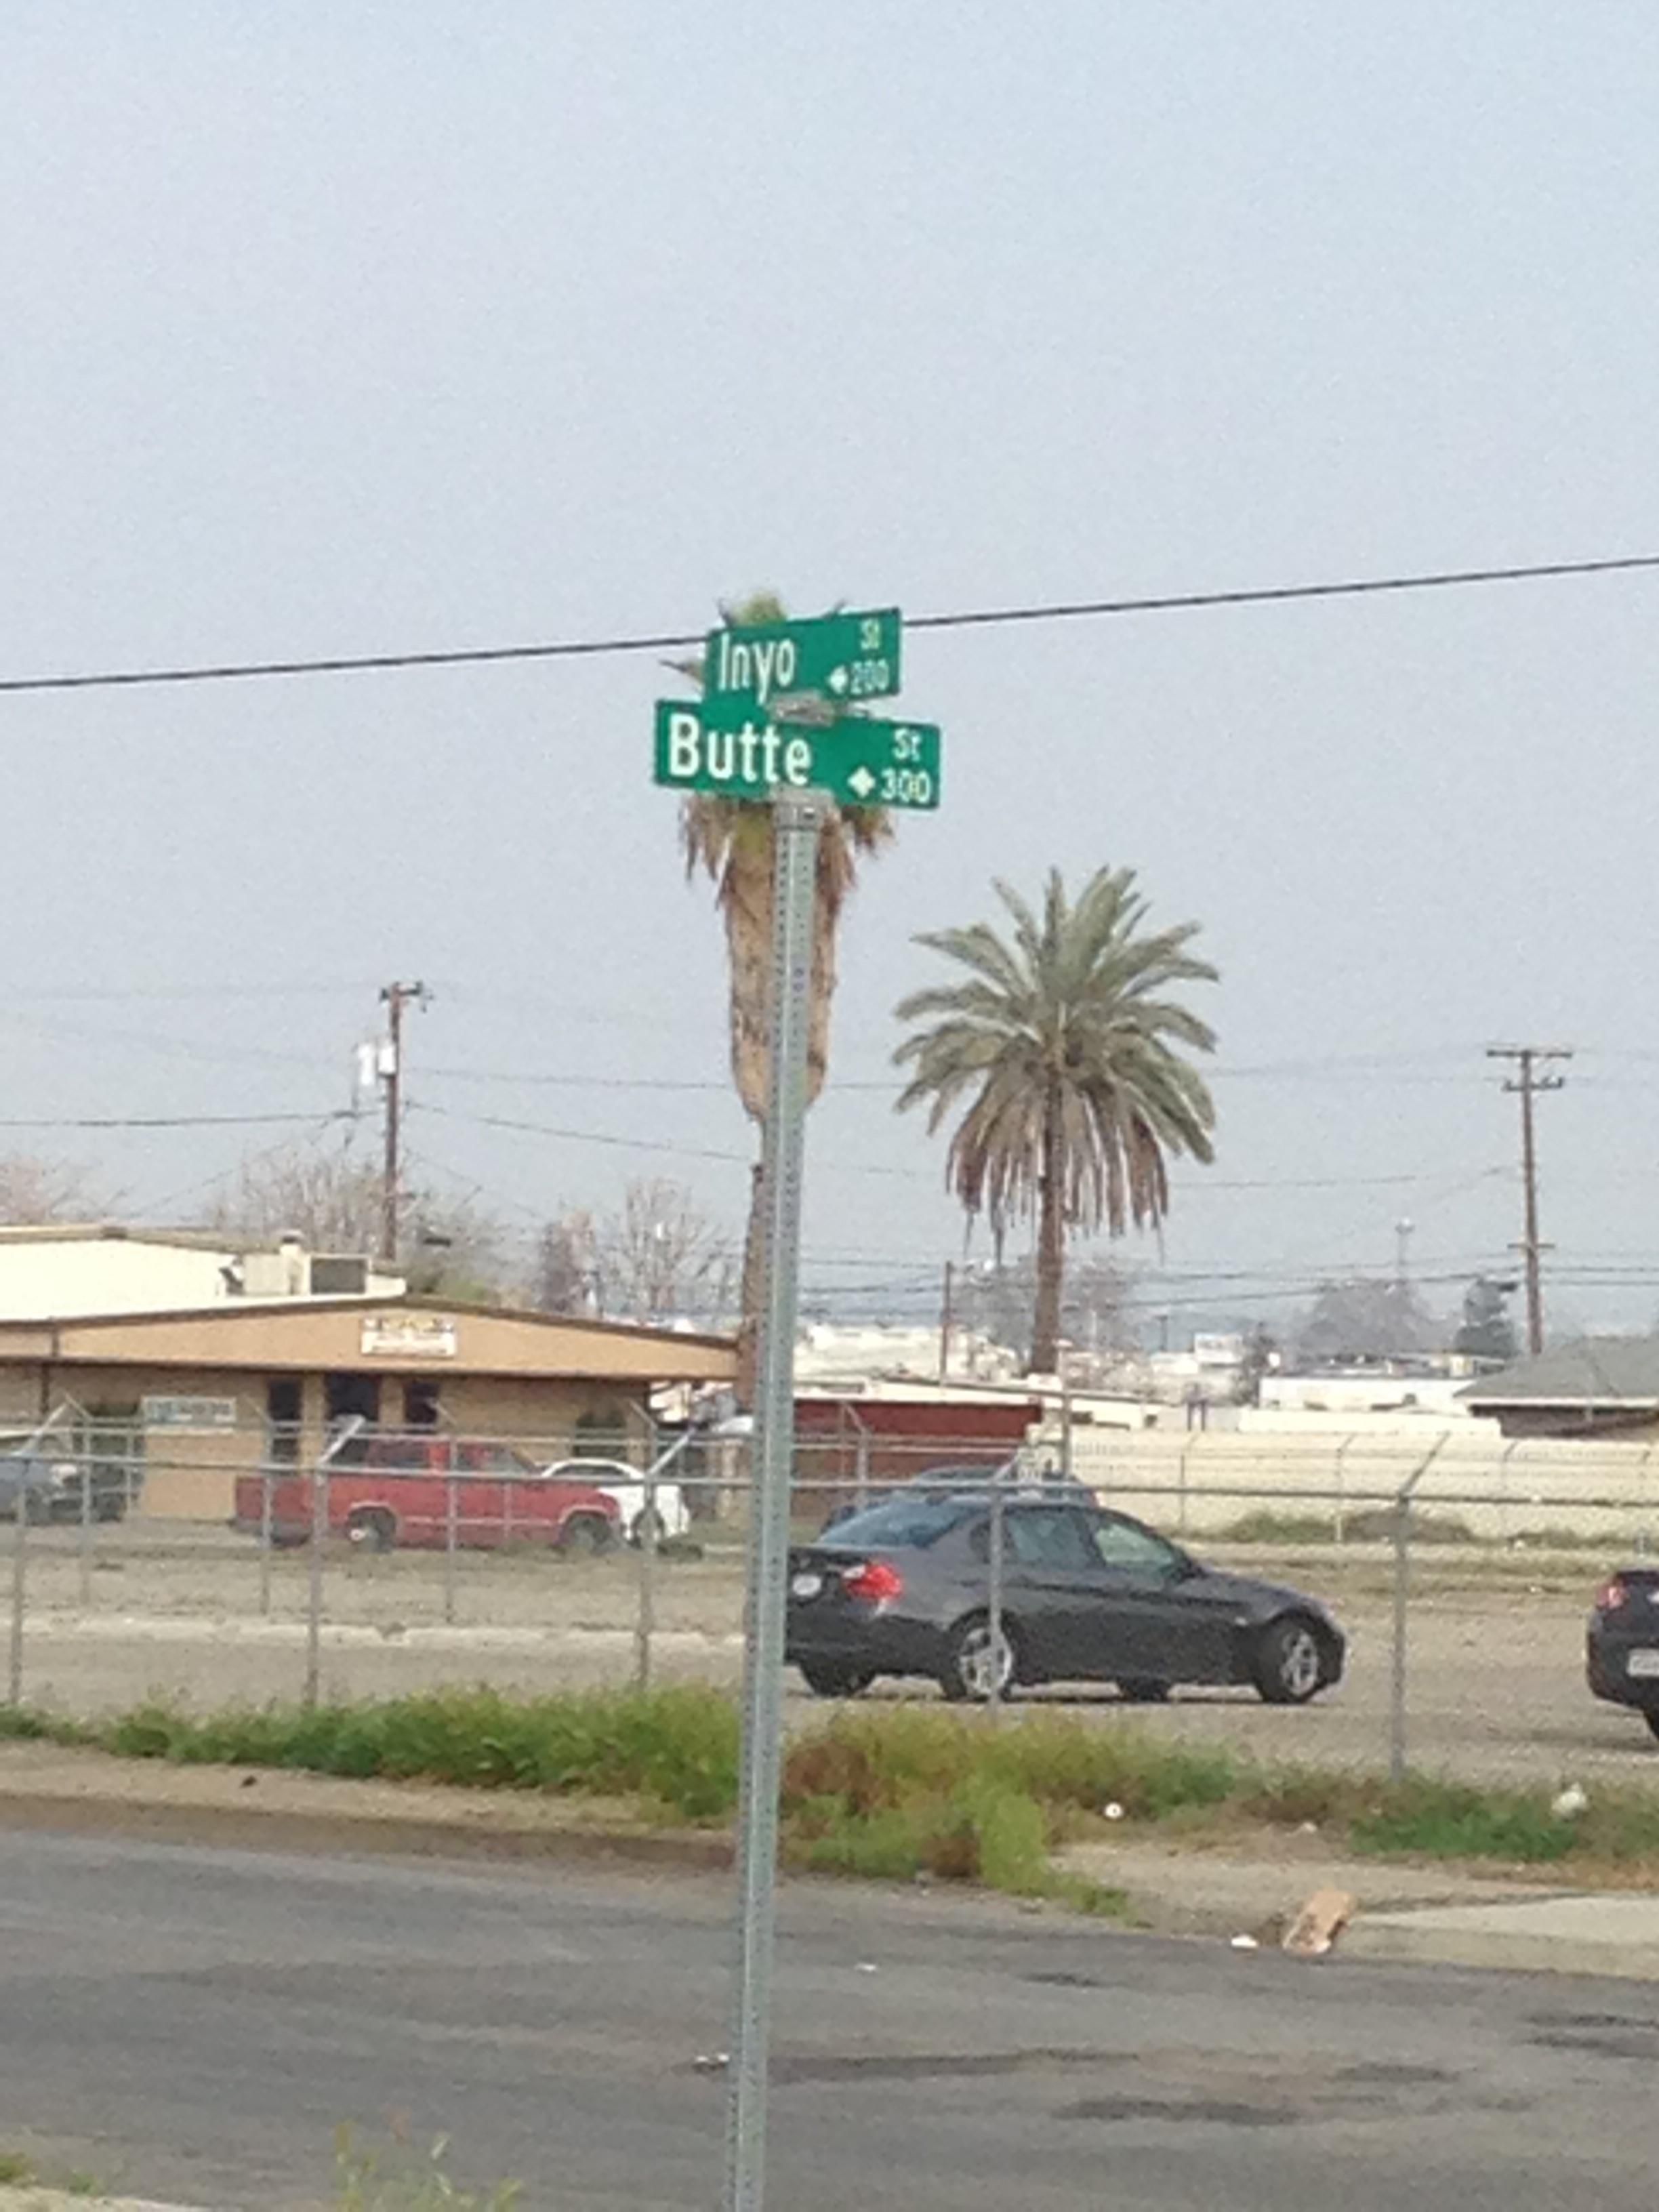 An intersection in Bakersfield, CA